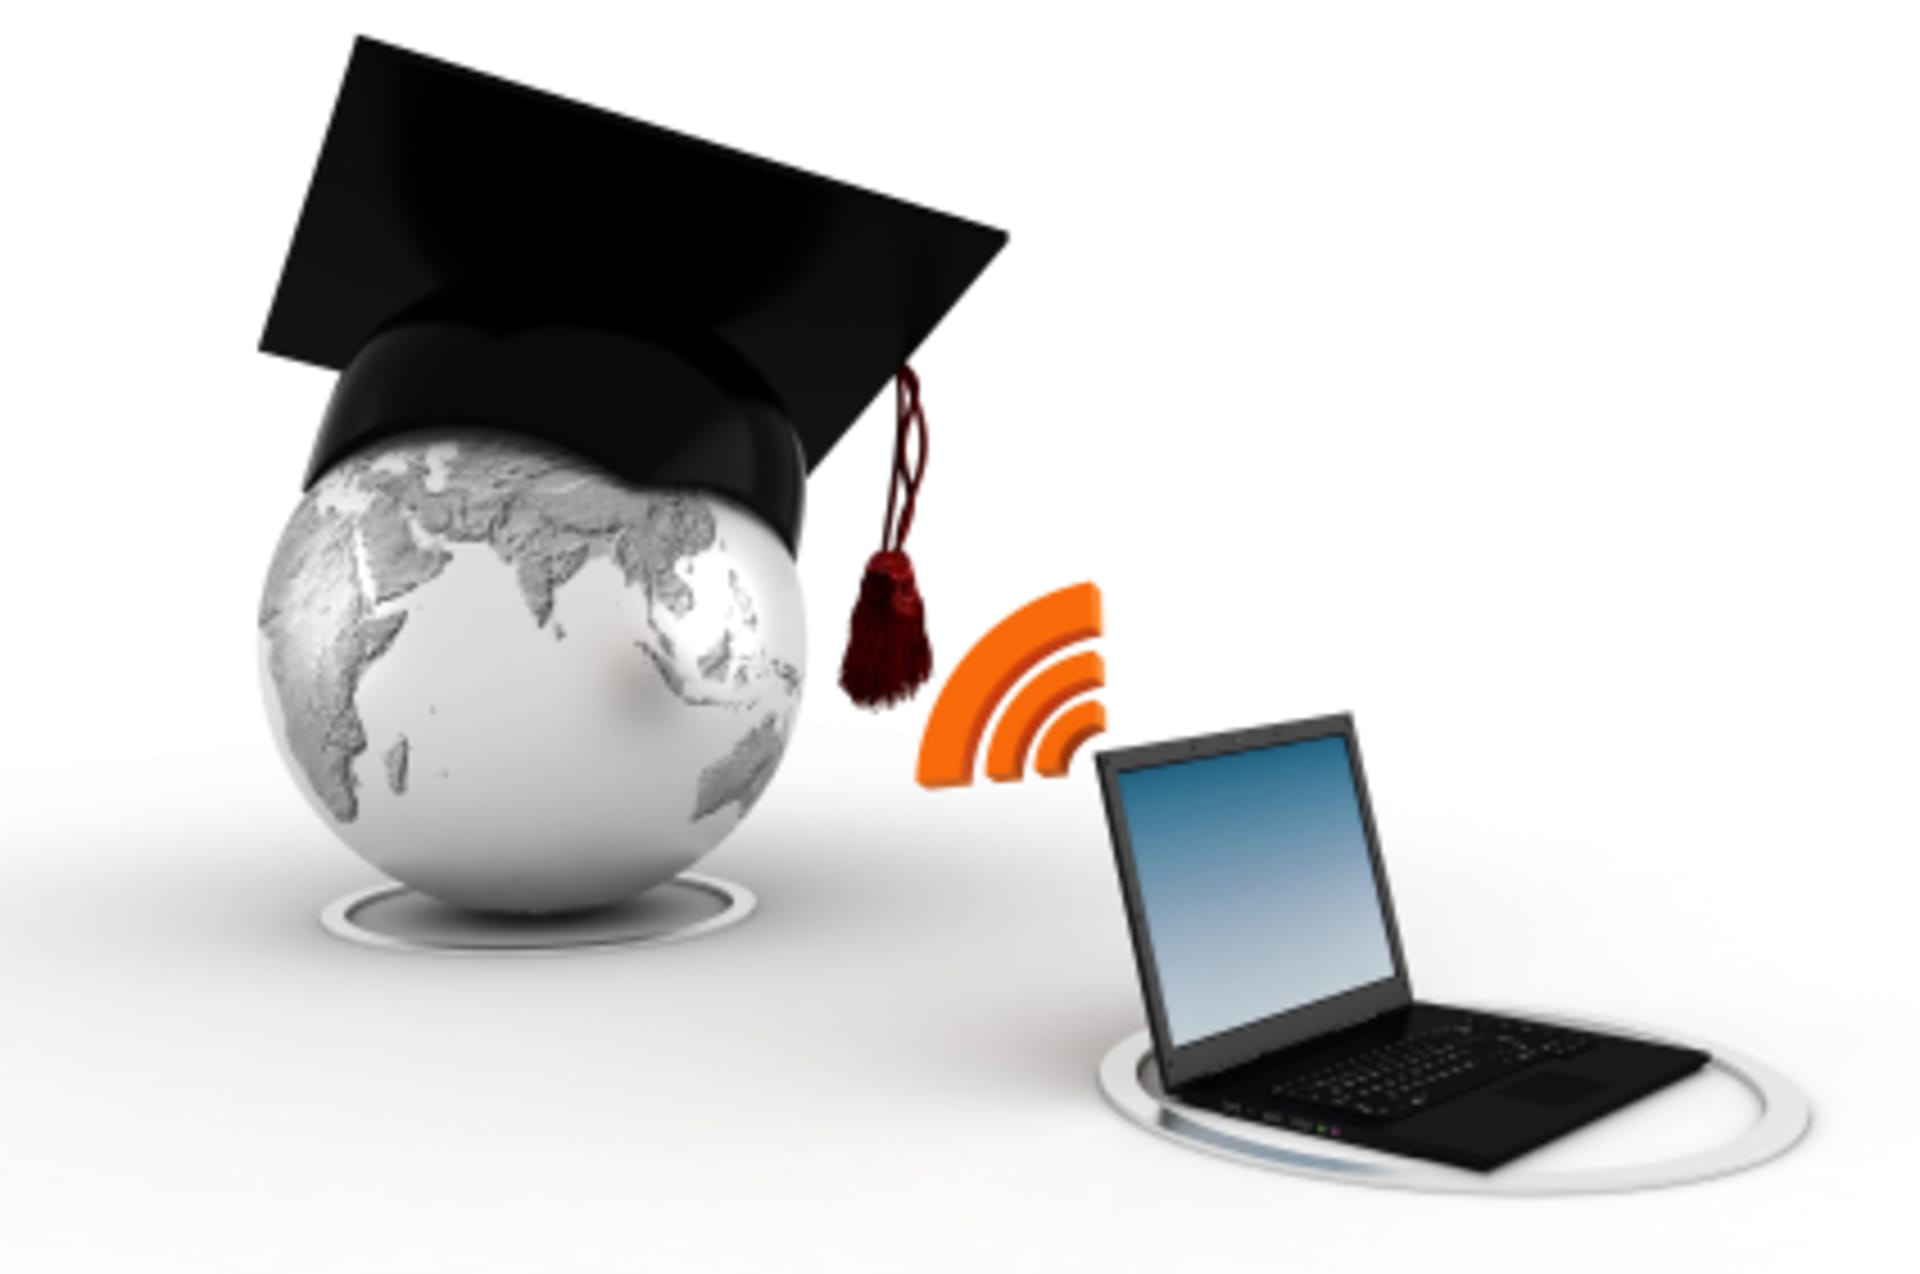 online education is becoming increasingly popular